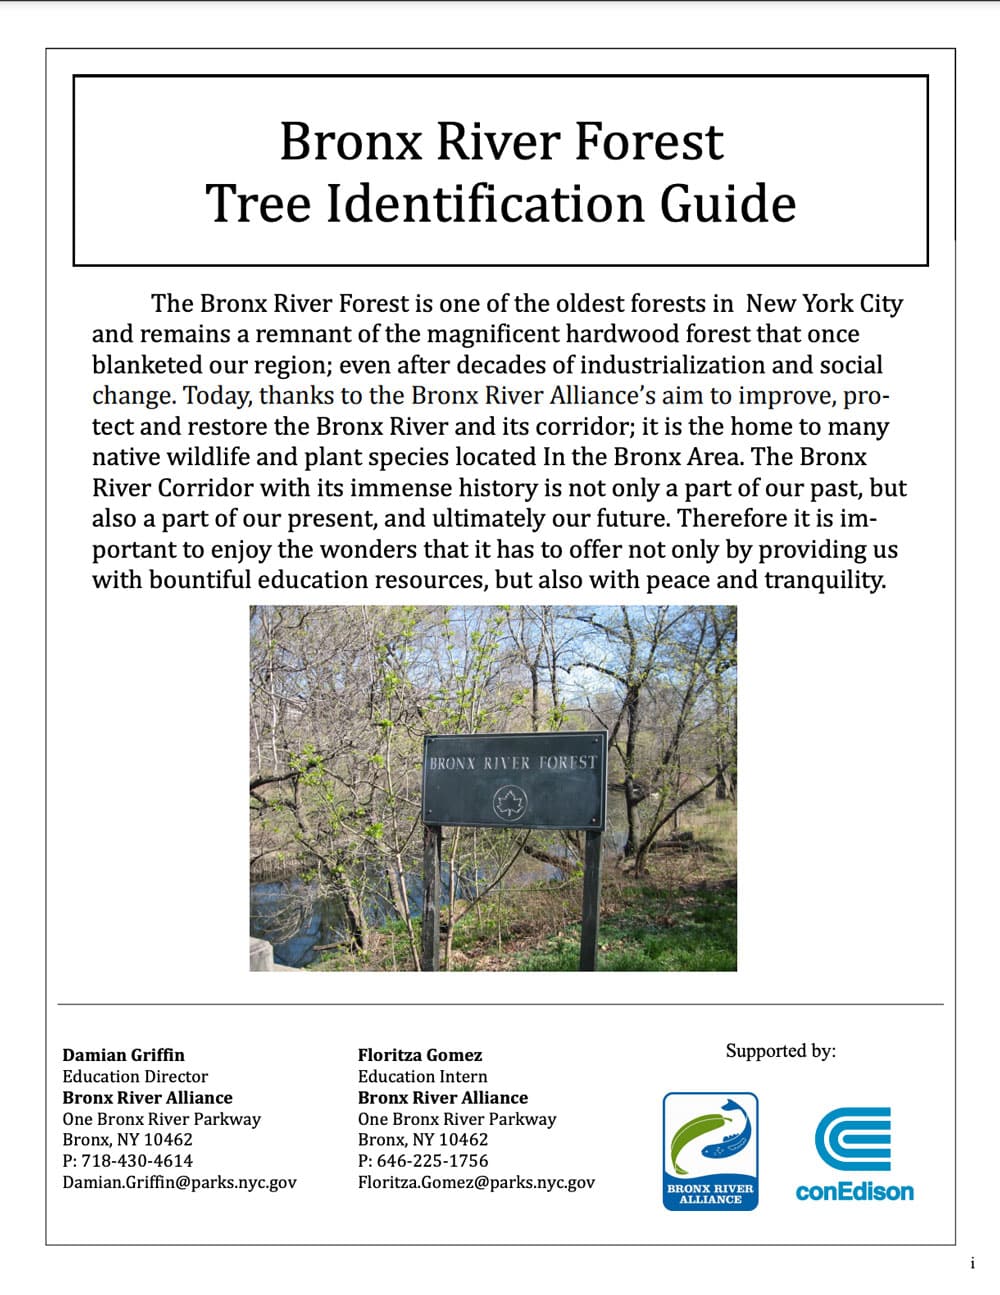 Bronx River Forest Tree Identification Guide